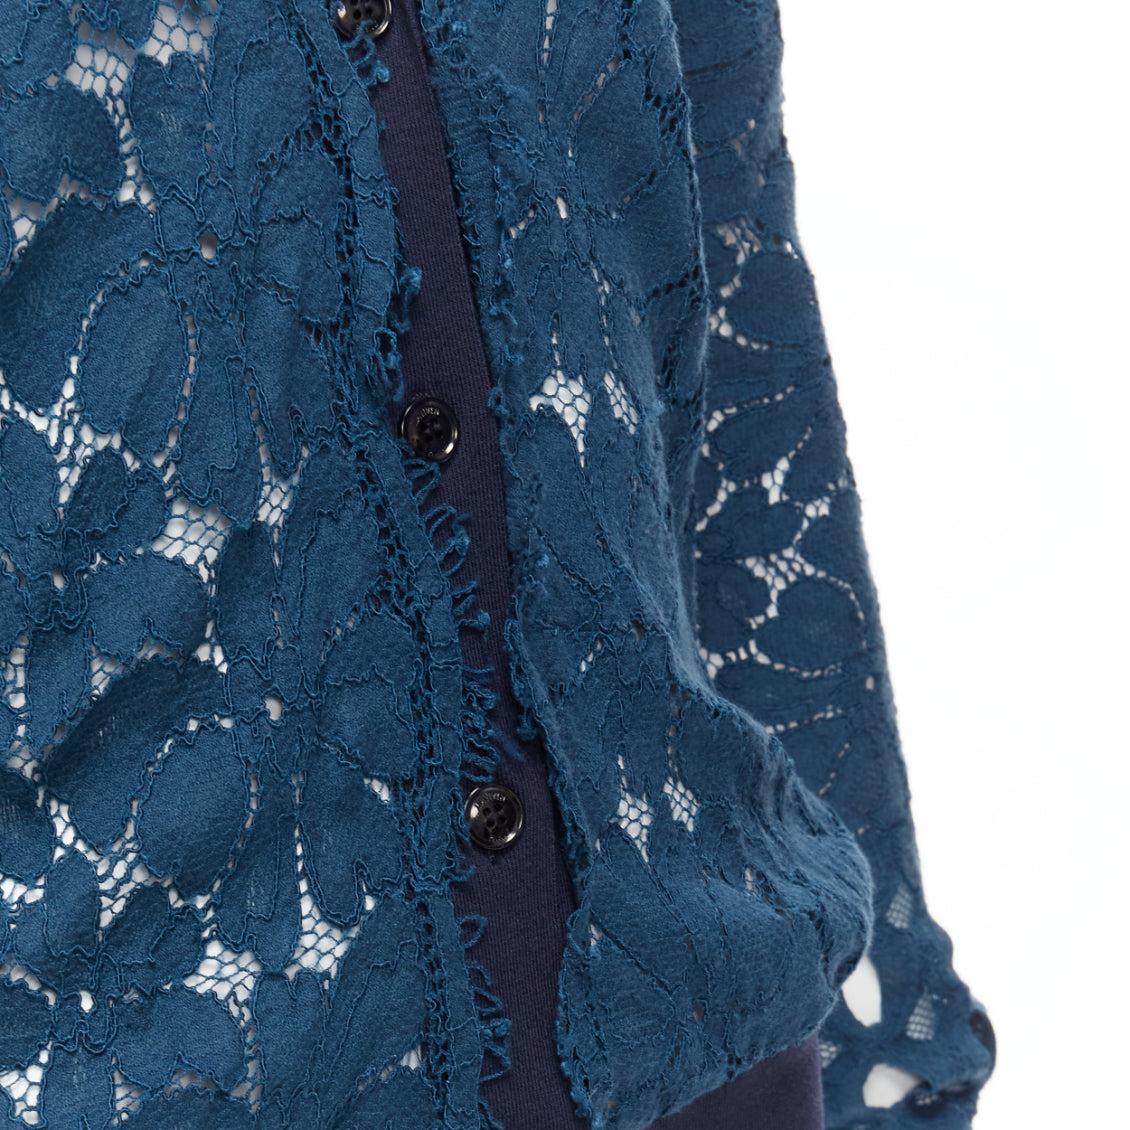 LANVIN 2015 blue silk cotton floral lace sheer long sleeve V neck cardigan S
Reference: DYTG/A00050
Brand: Lanvin
Designer: Alber Elbaz
Collection: 2015
Material: Silk, Cotton
Color: Blue, Navy
Pattern: Lace
Closure: Button
Extra Details: Jersey rib